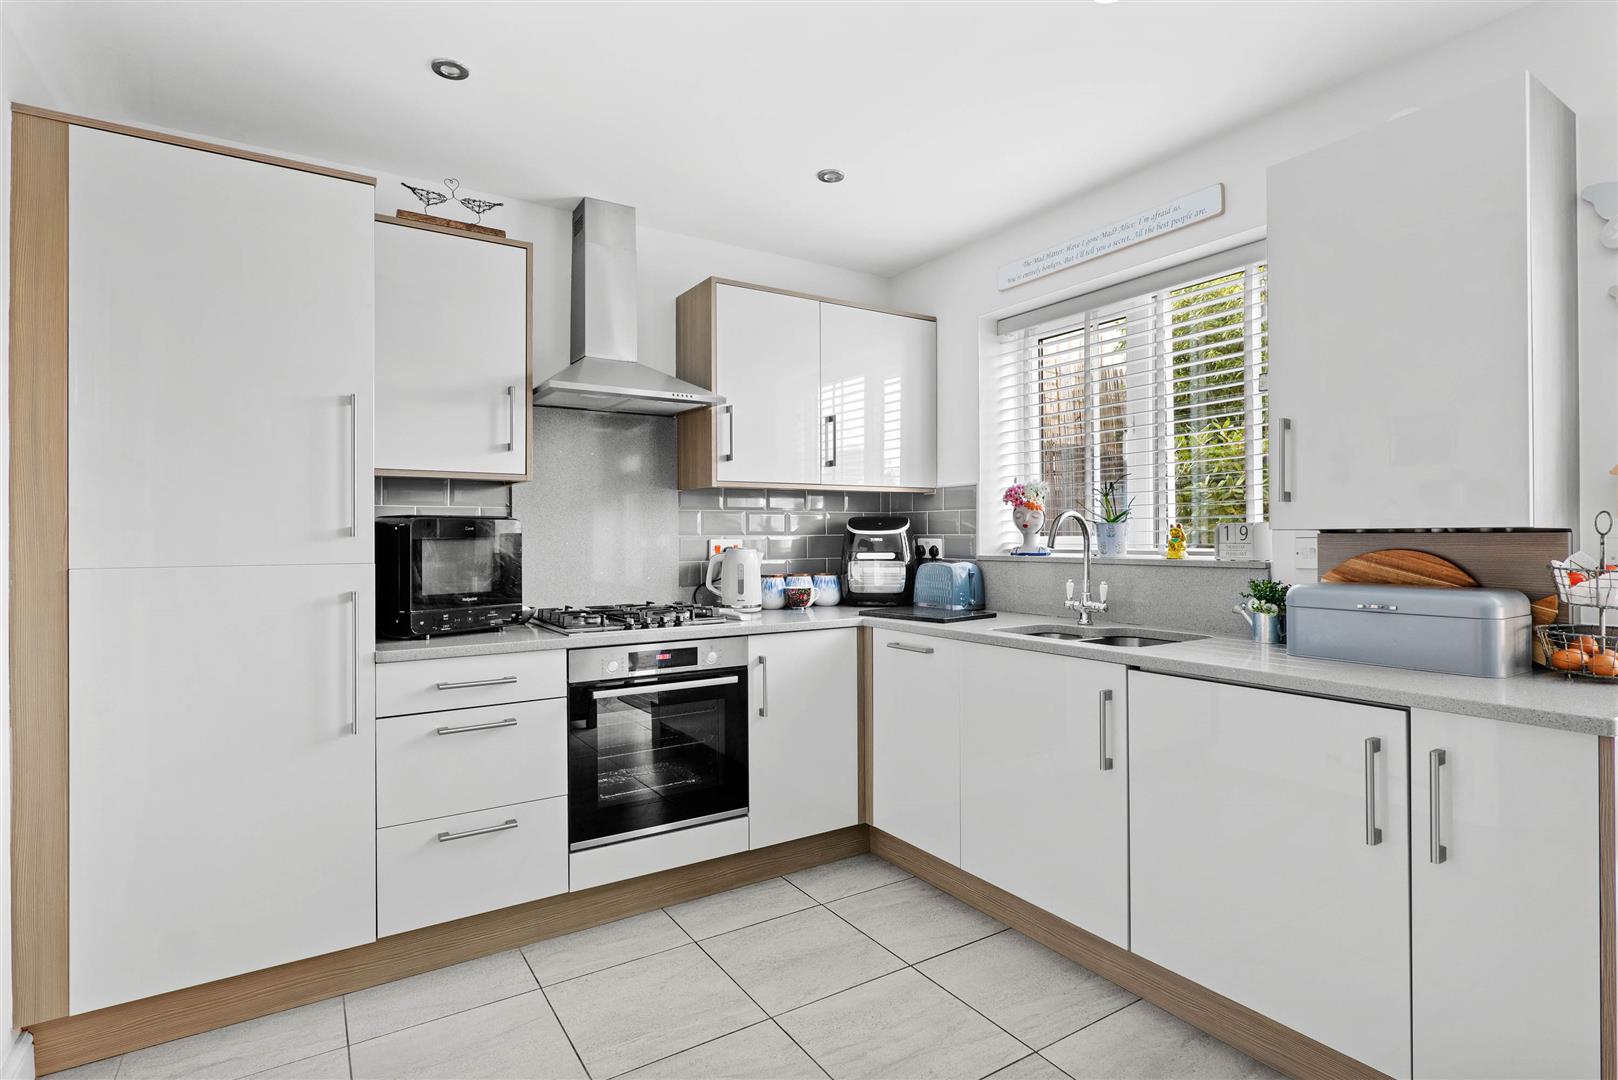 3 bed detached house for sale in Camphill, Stourbridge  - Property Image 3